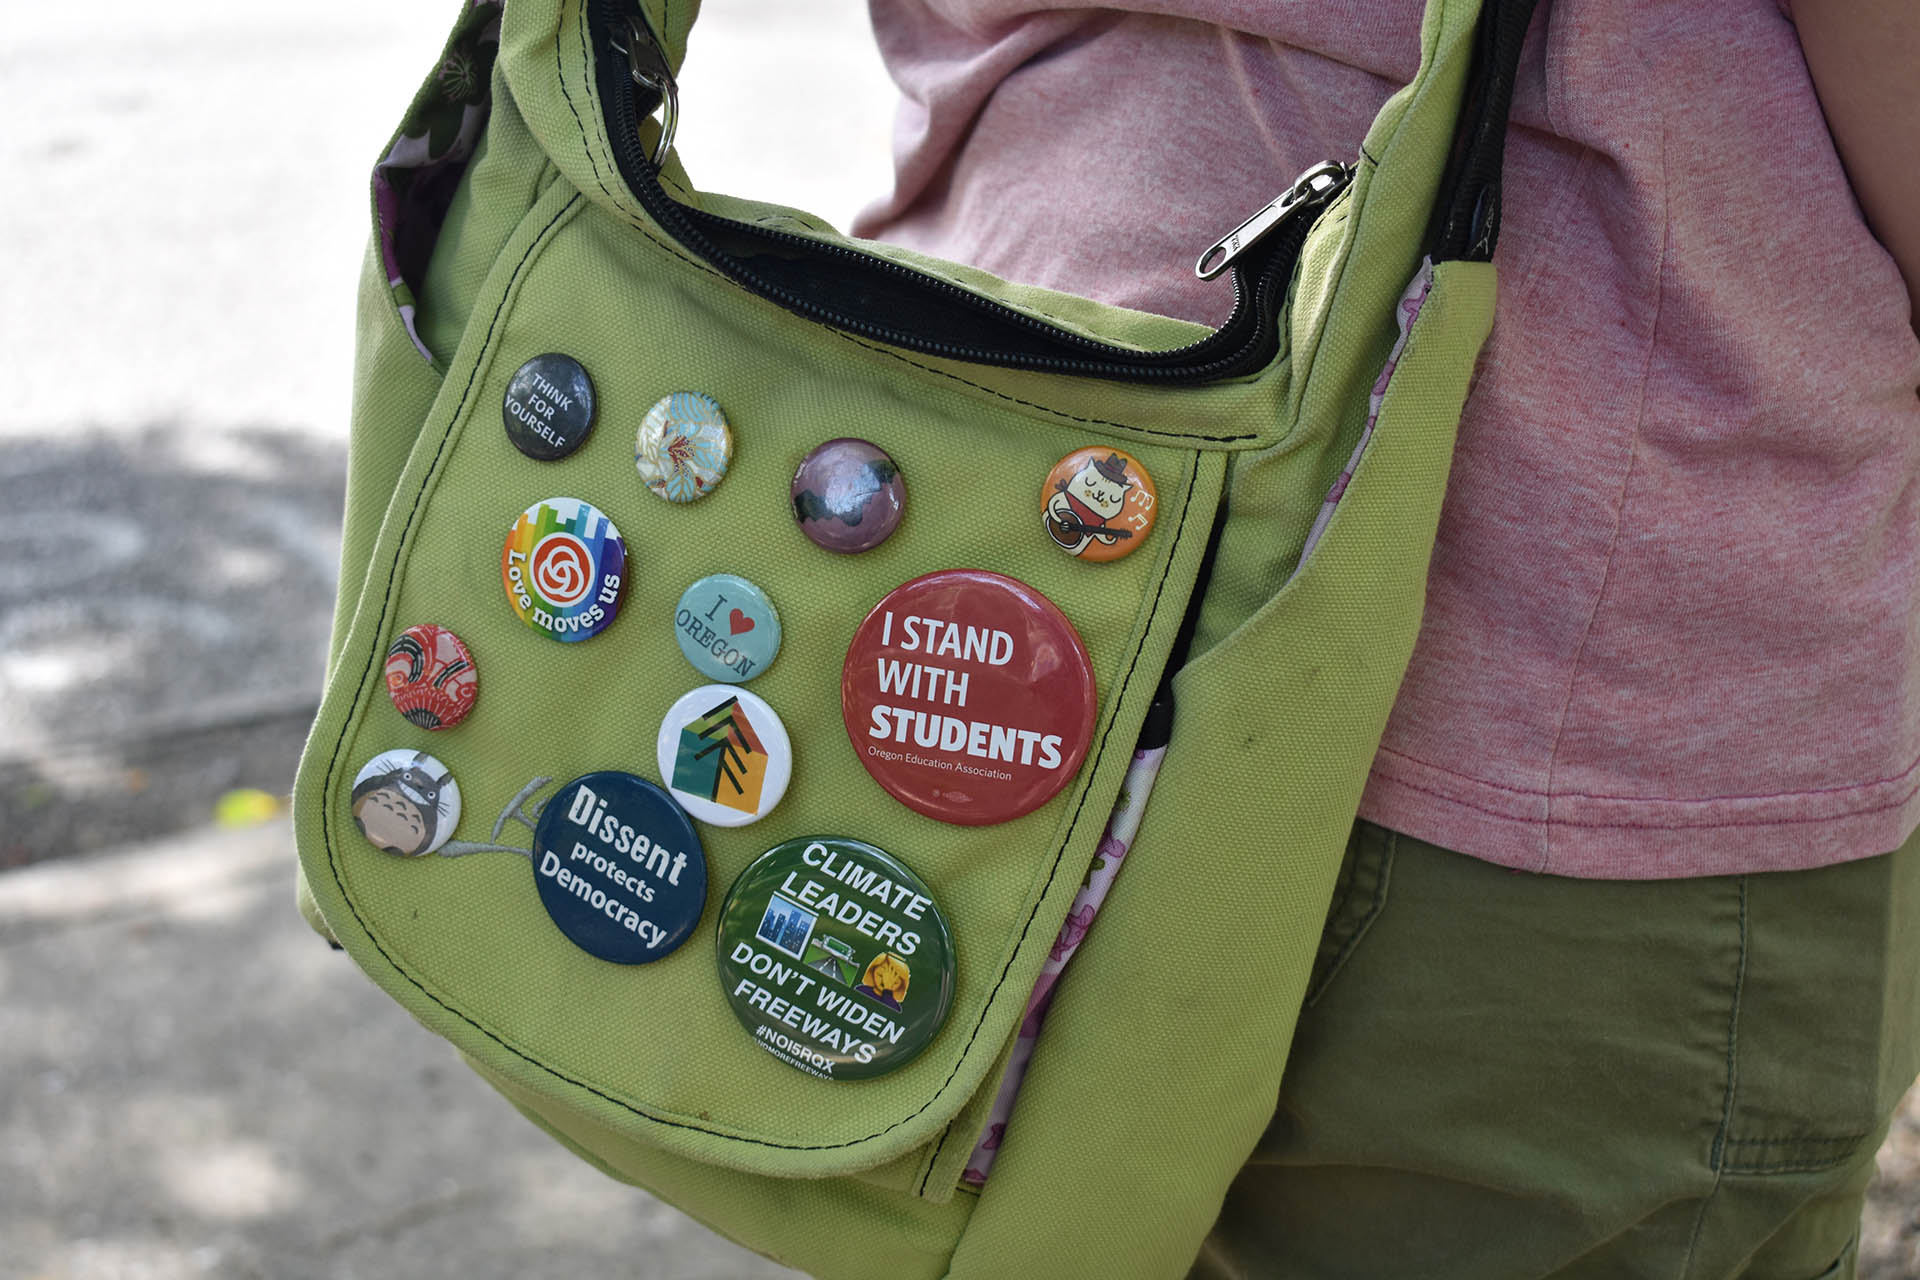 A green bag is scattered with buttons, mostly related to climate action and student movements, but some also feature animated characters like “My Neighbor Totoro.”